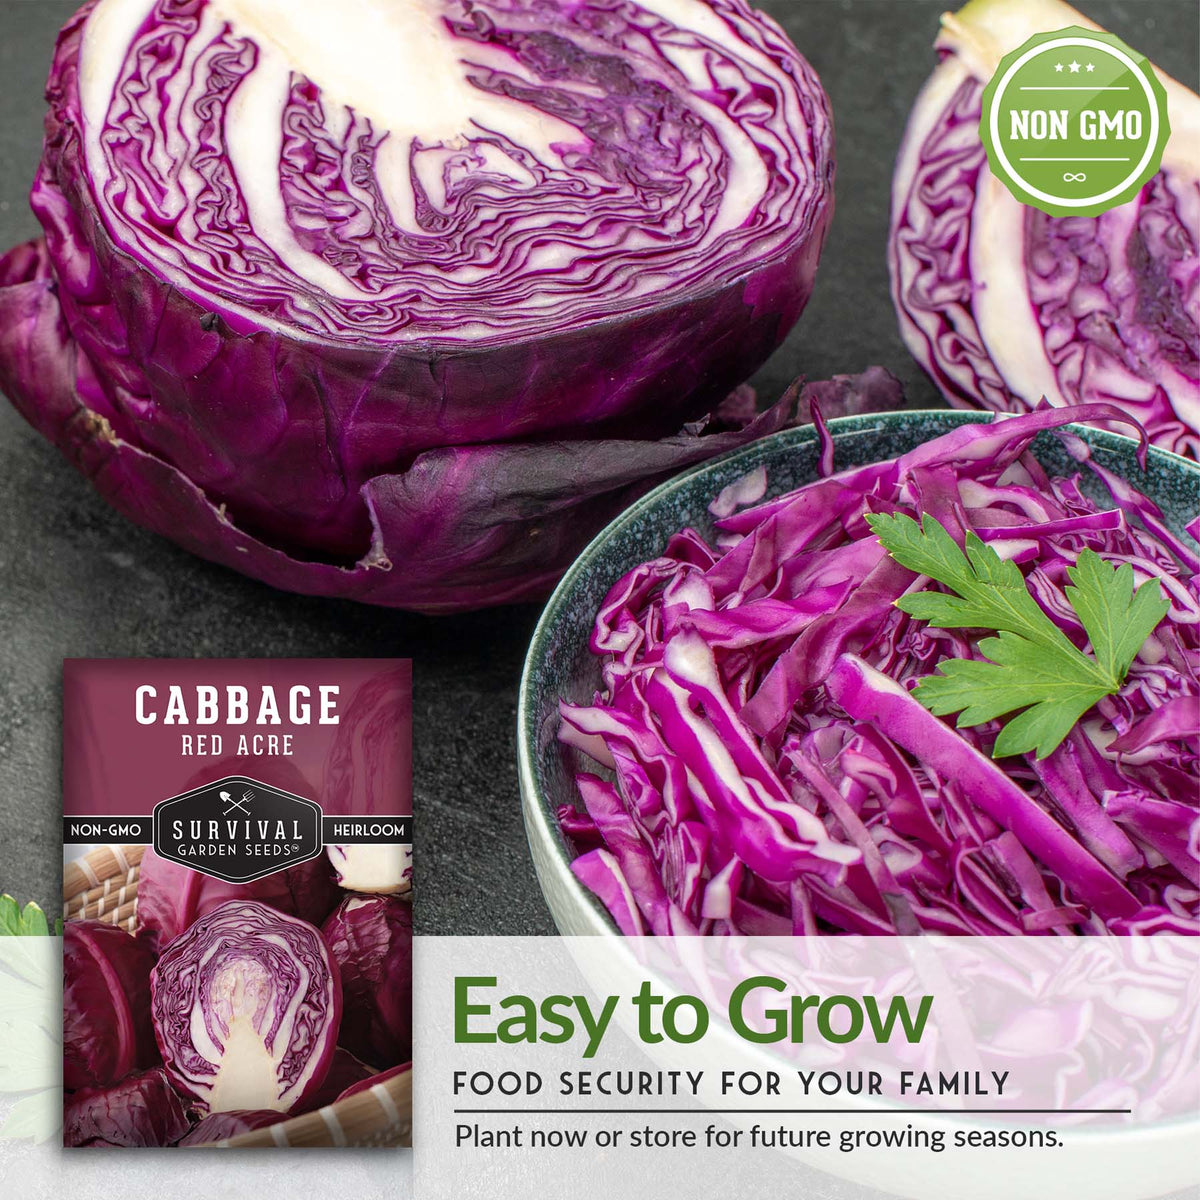 Red Acre Cabbage is easy to grow